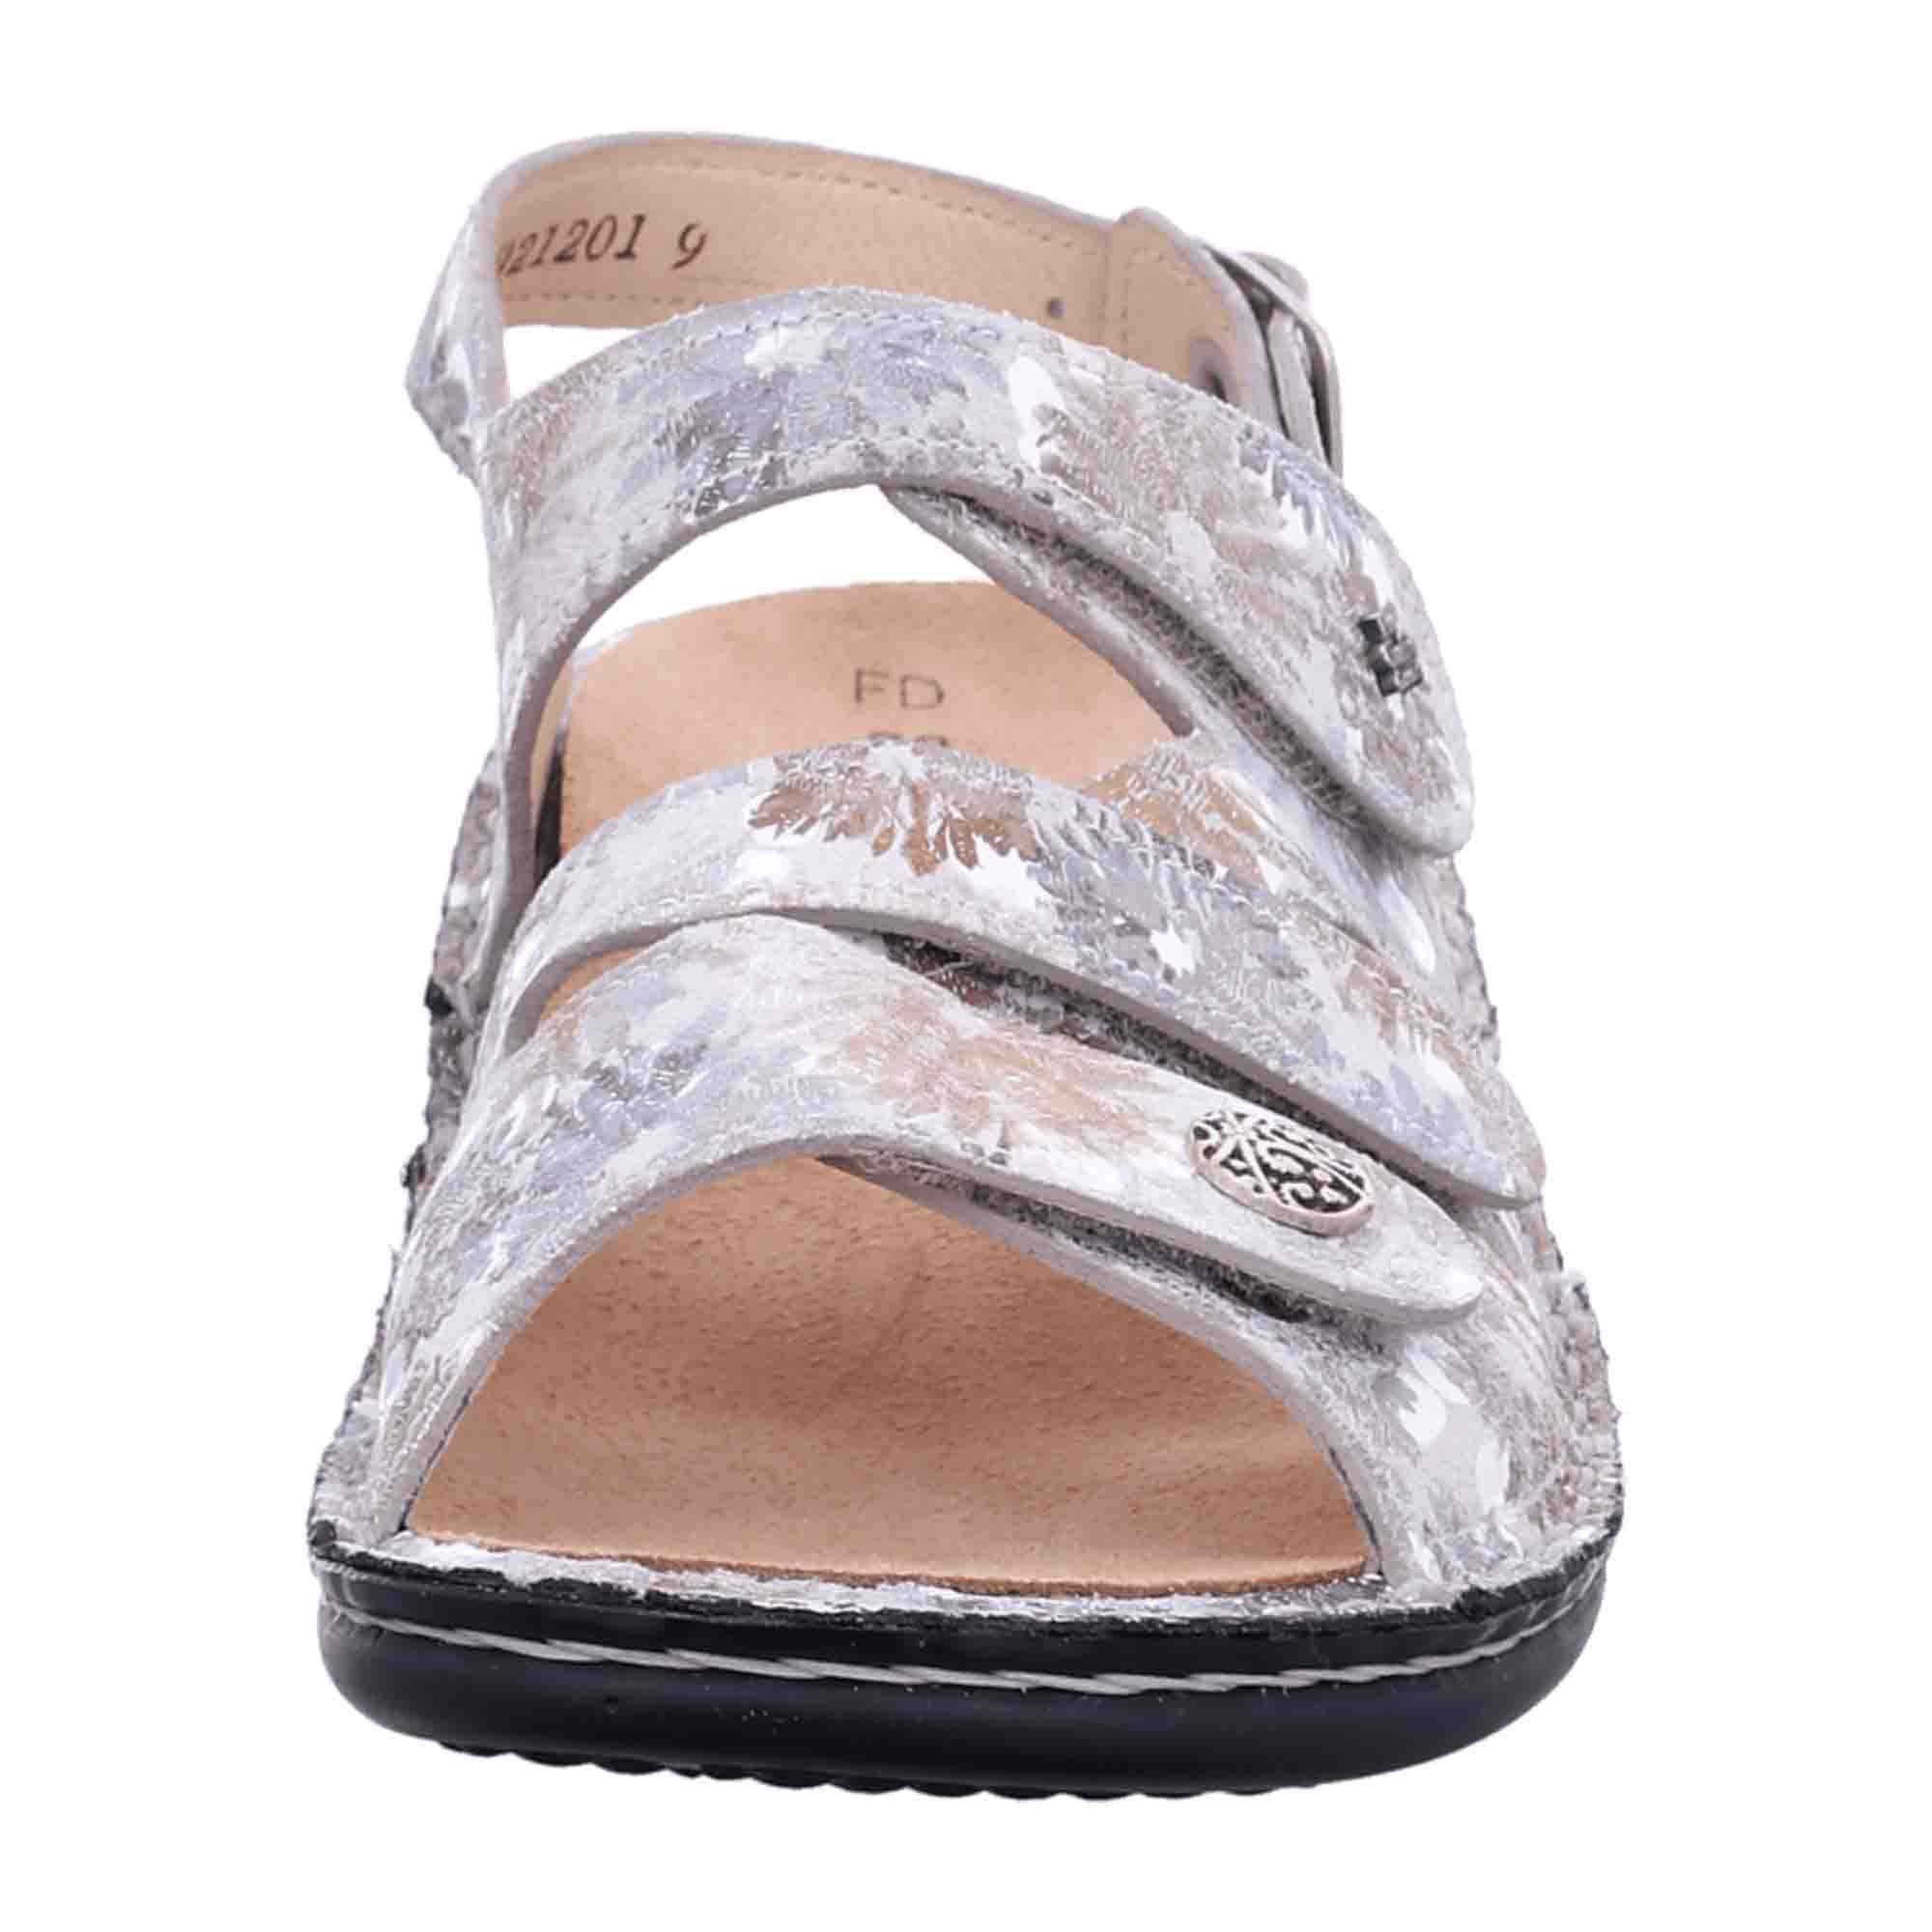 Finn Comfort Gomera Sandals for Women - Beige Leather Comfort Sandals with Removable Insoles